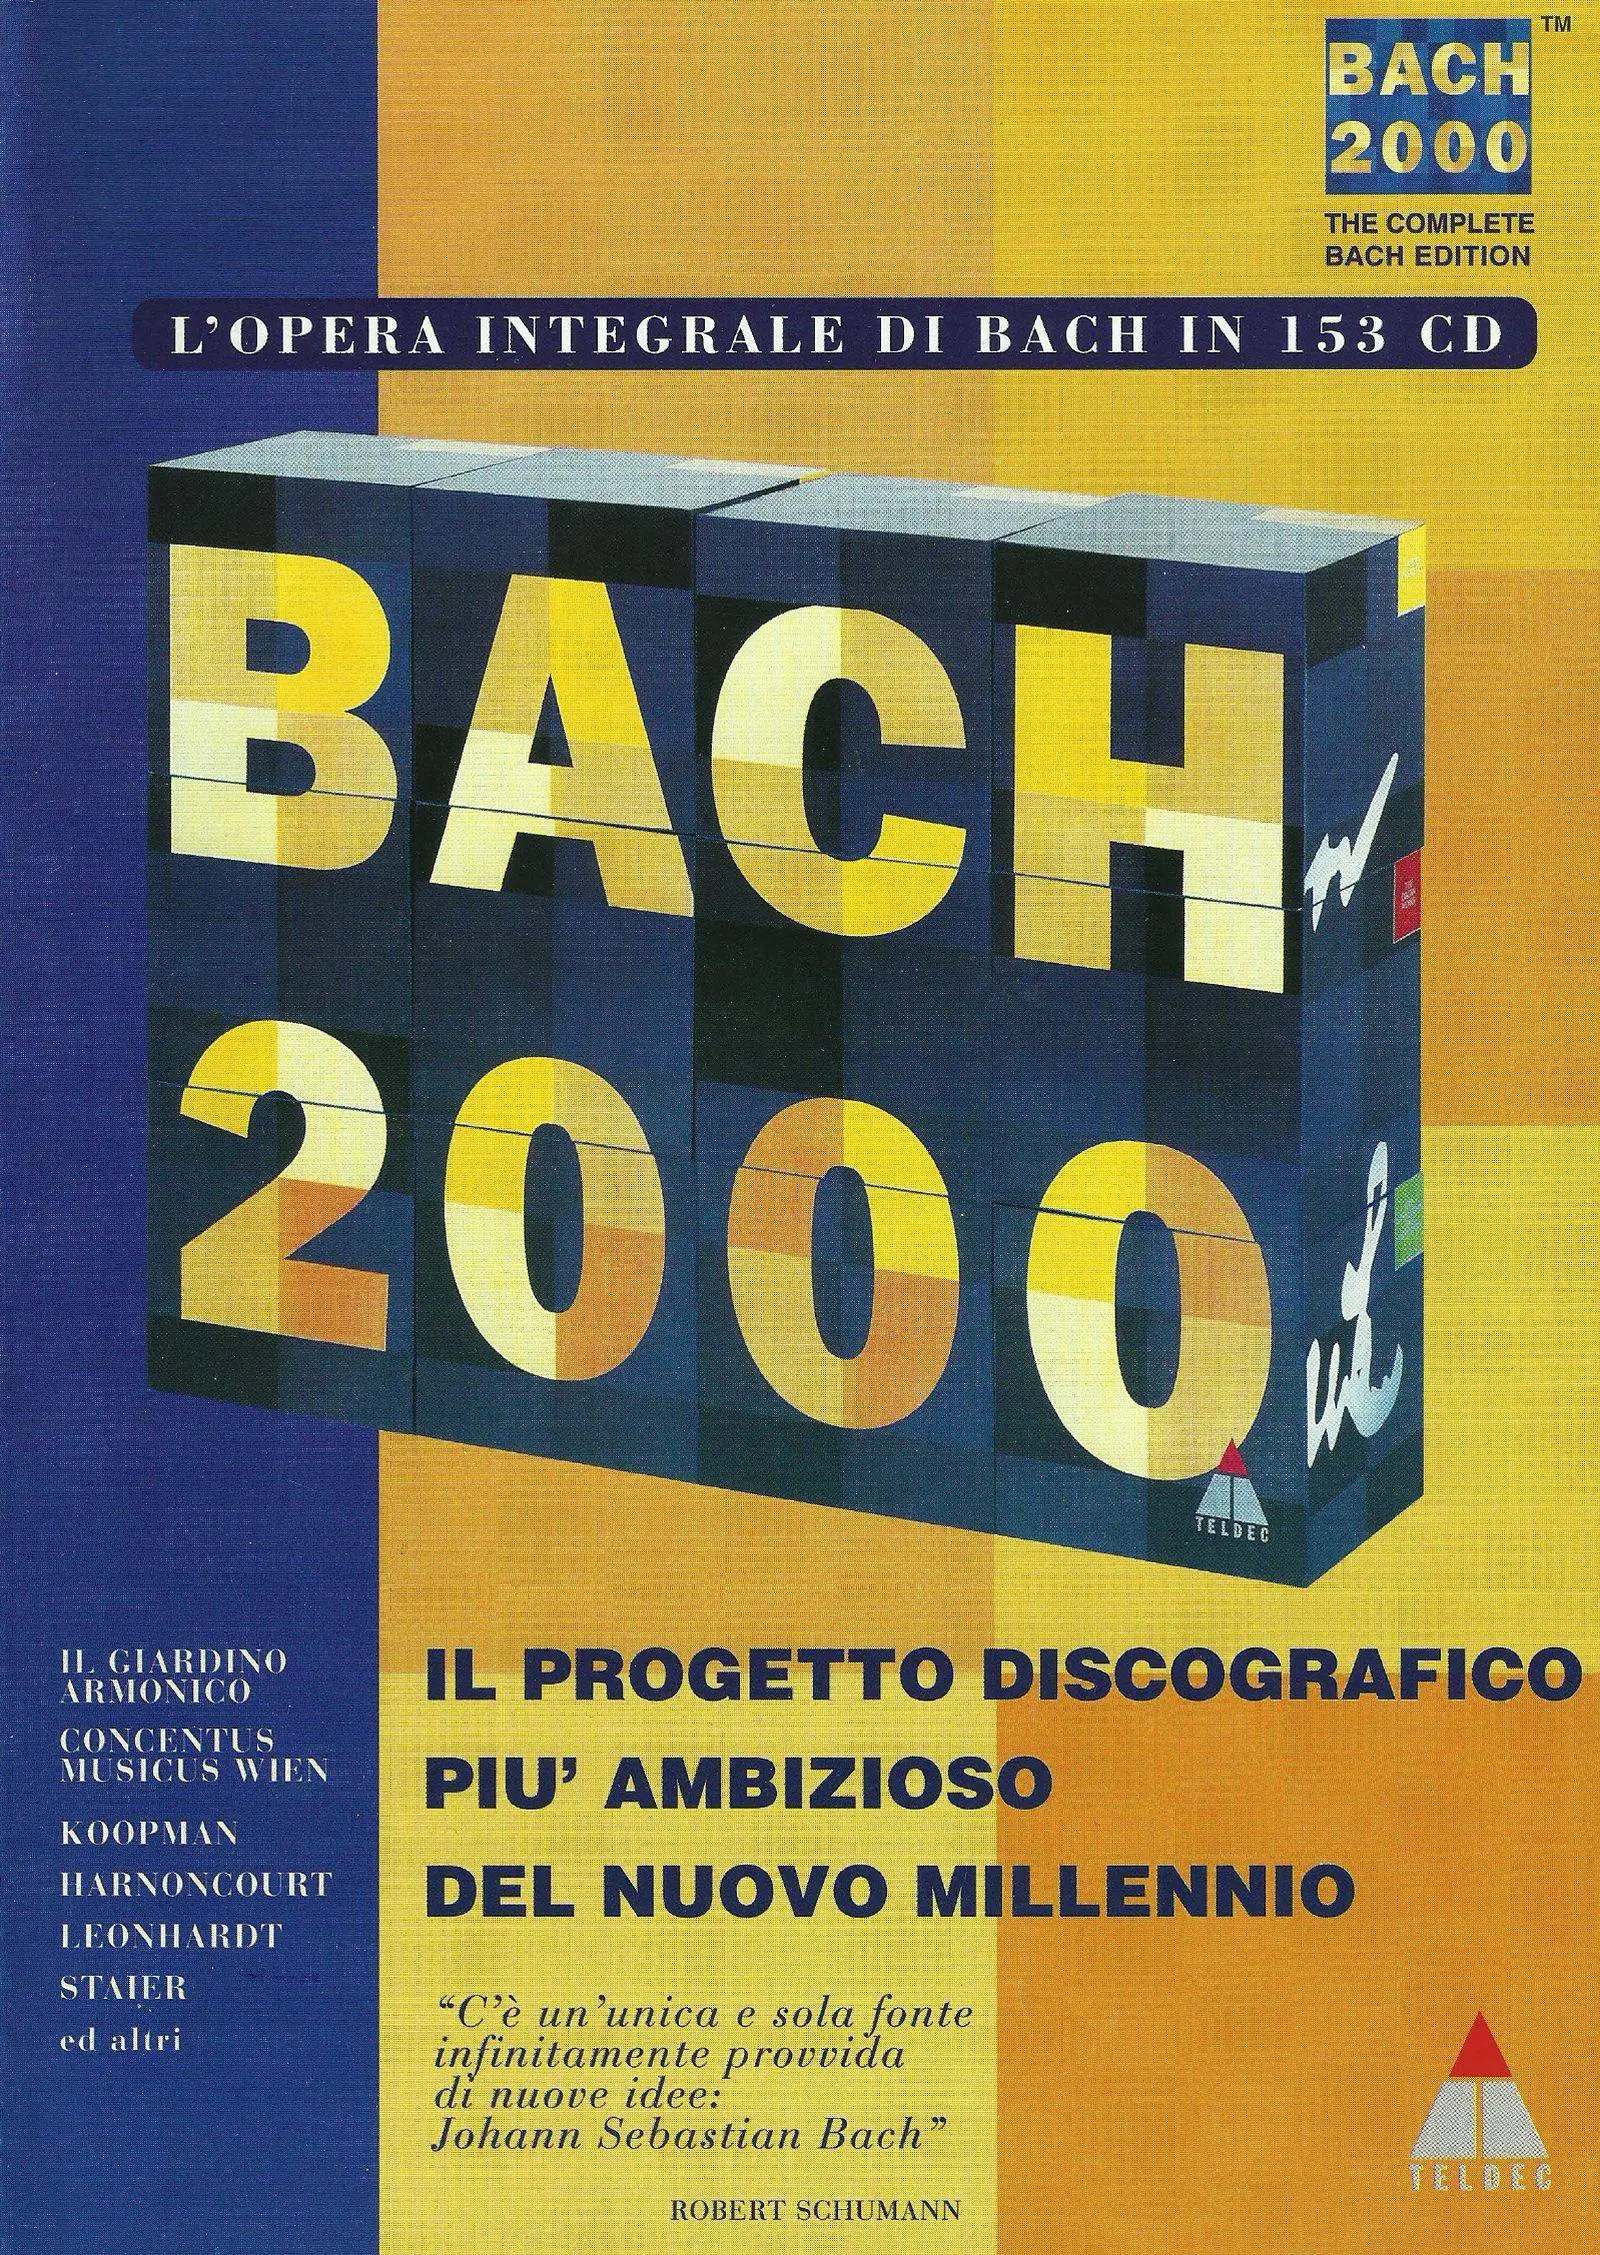 bach 2000 the complete bach edition tracklist